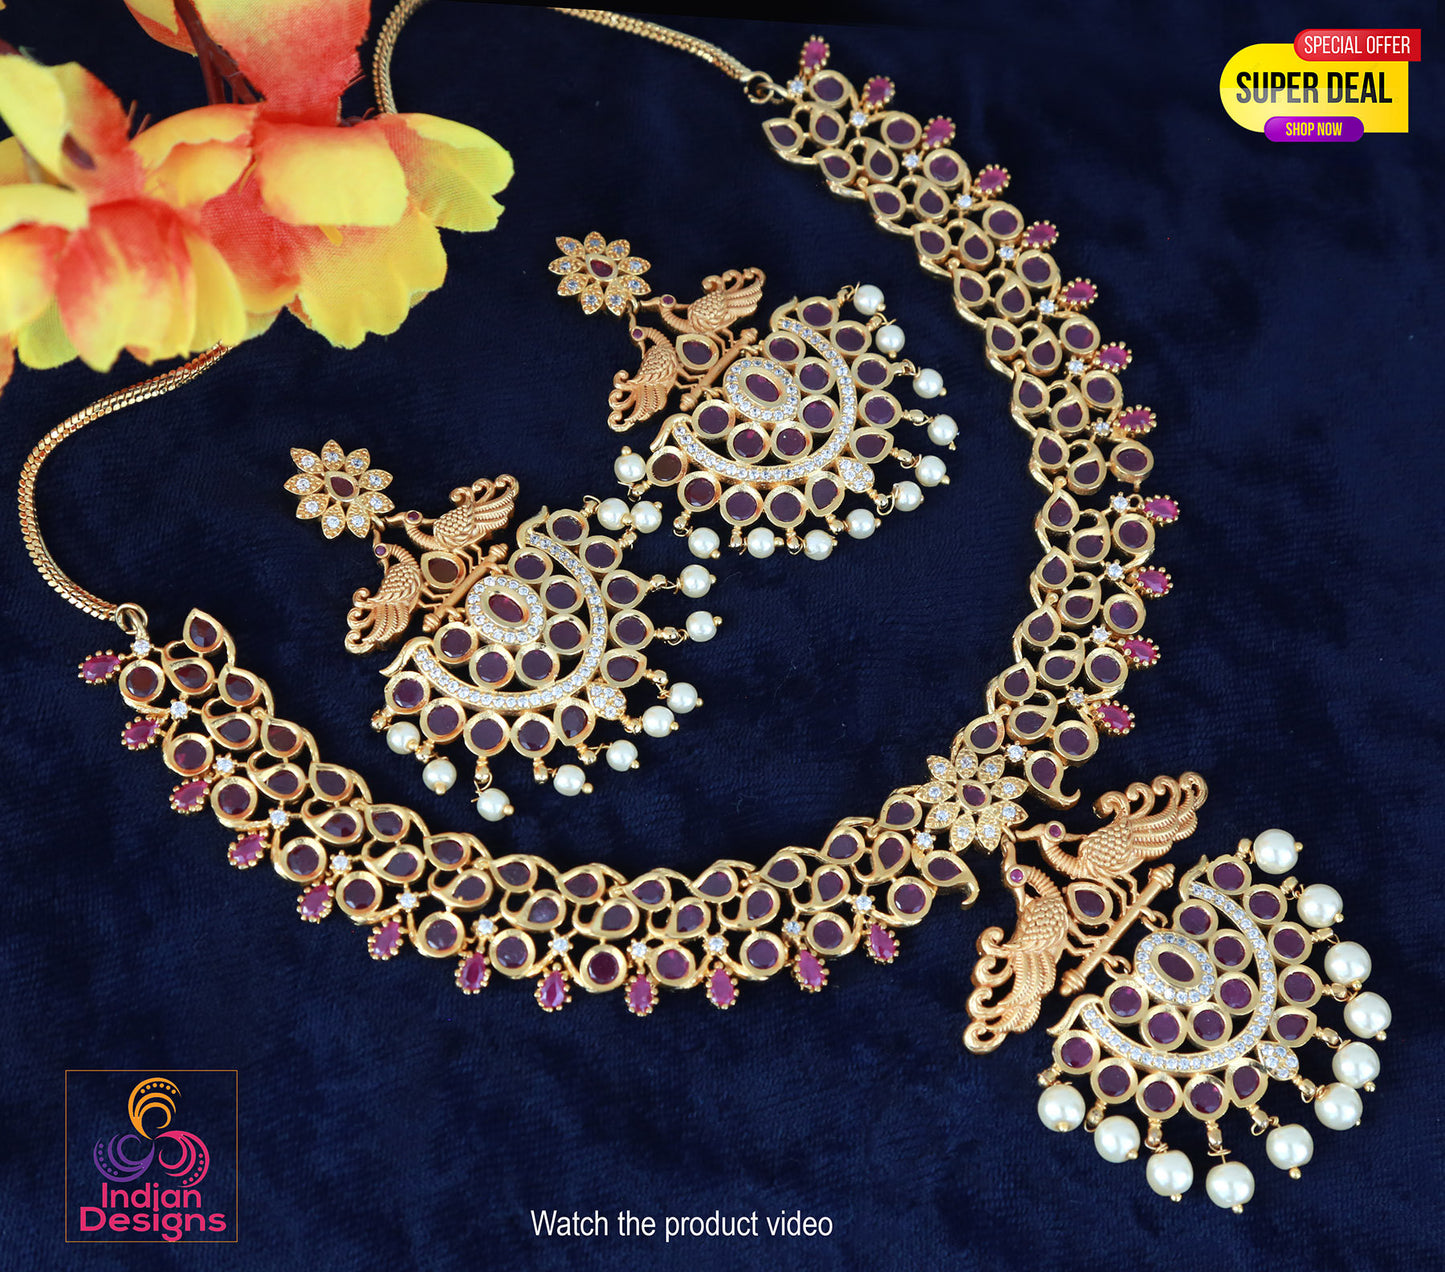 Traditional Matte Gold Peacock Pearl Necklace and Earrings Set| Statement necklace with peacock design| South Indian Bridal Wedding Jewelry